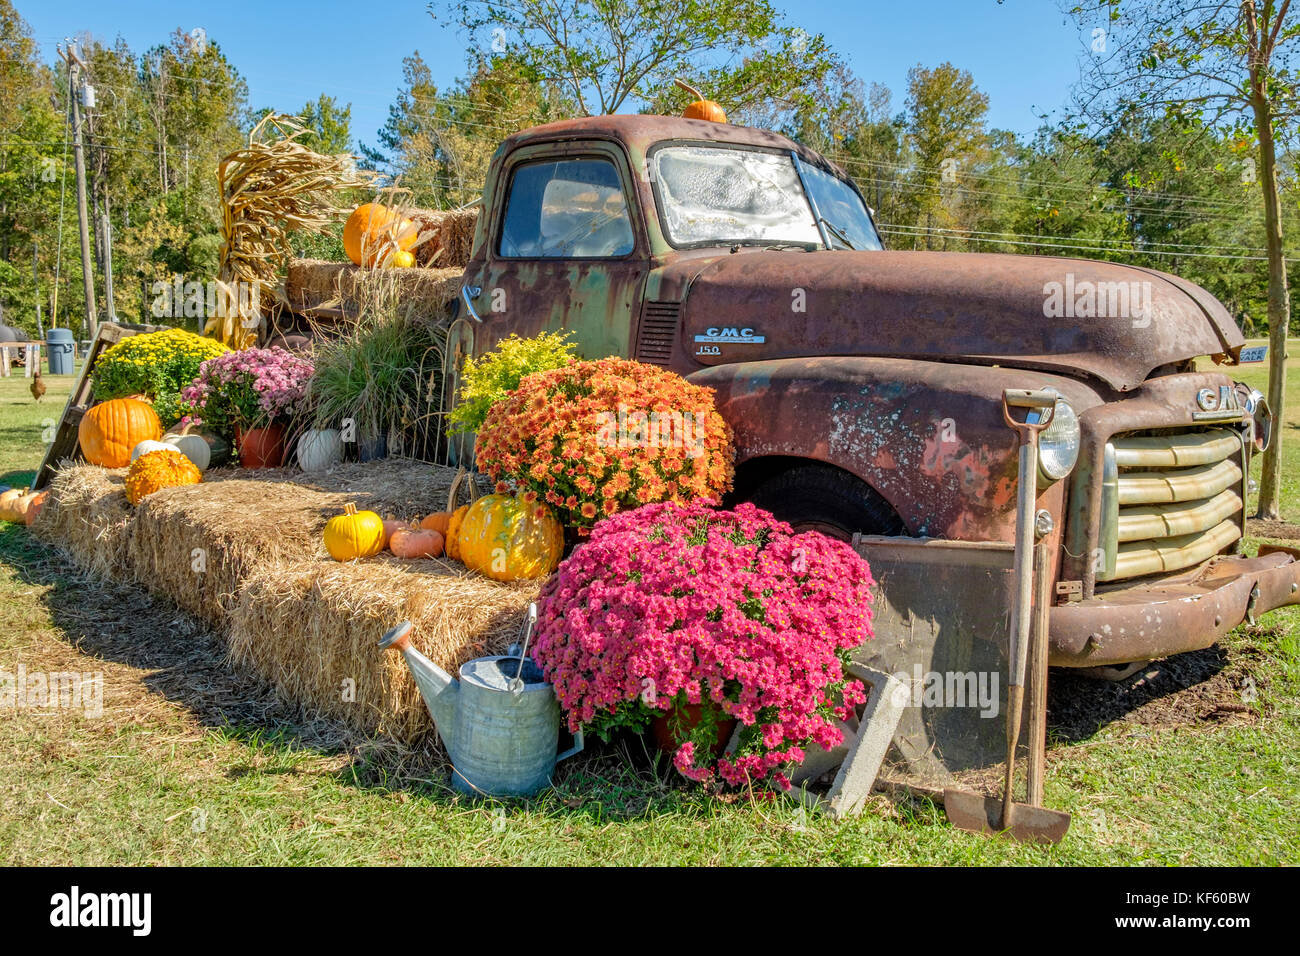 Fall or autumn display of pumpkins, gourds and flowers for the Halloween and Thanksgiving holidays at Sweet Creek Market, Pike Road Alabama, USA. Stock Photo